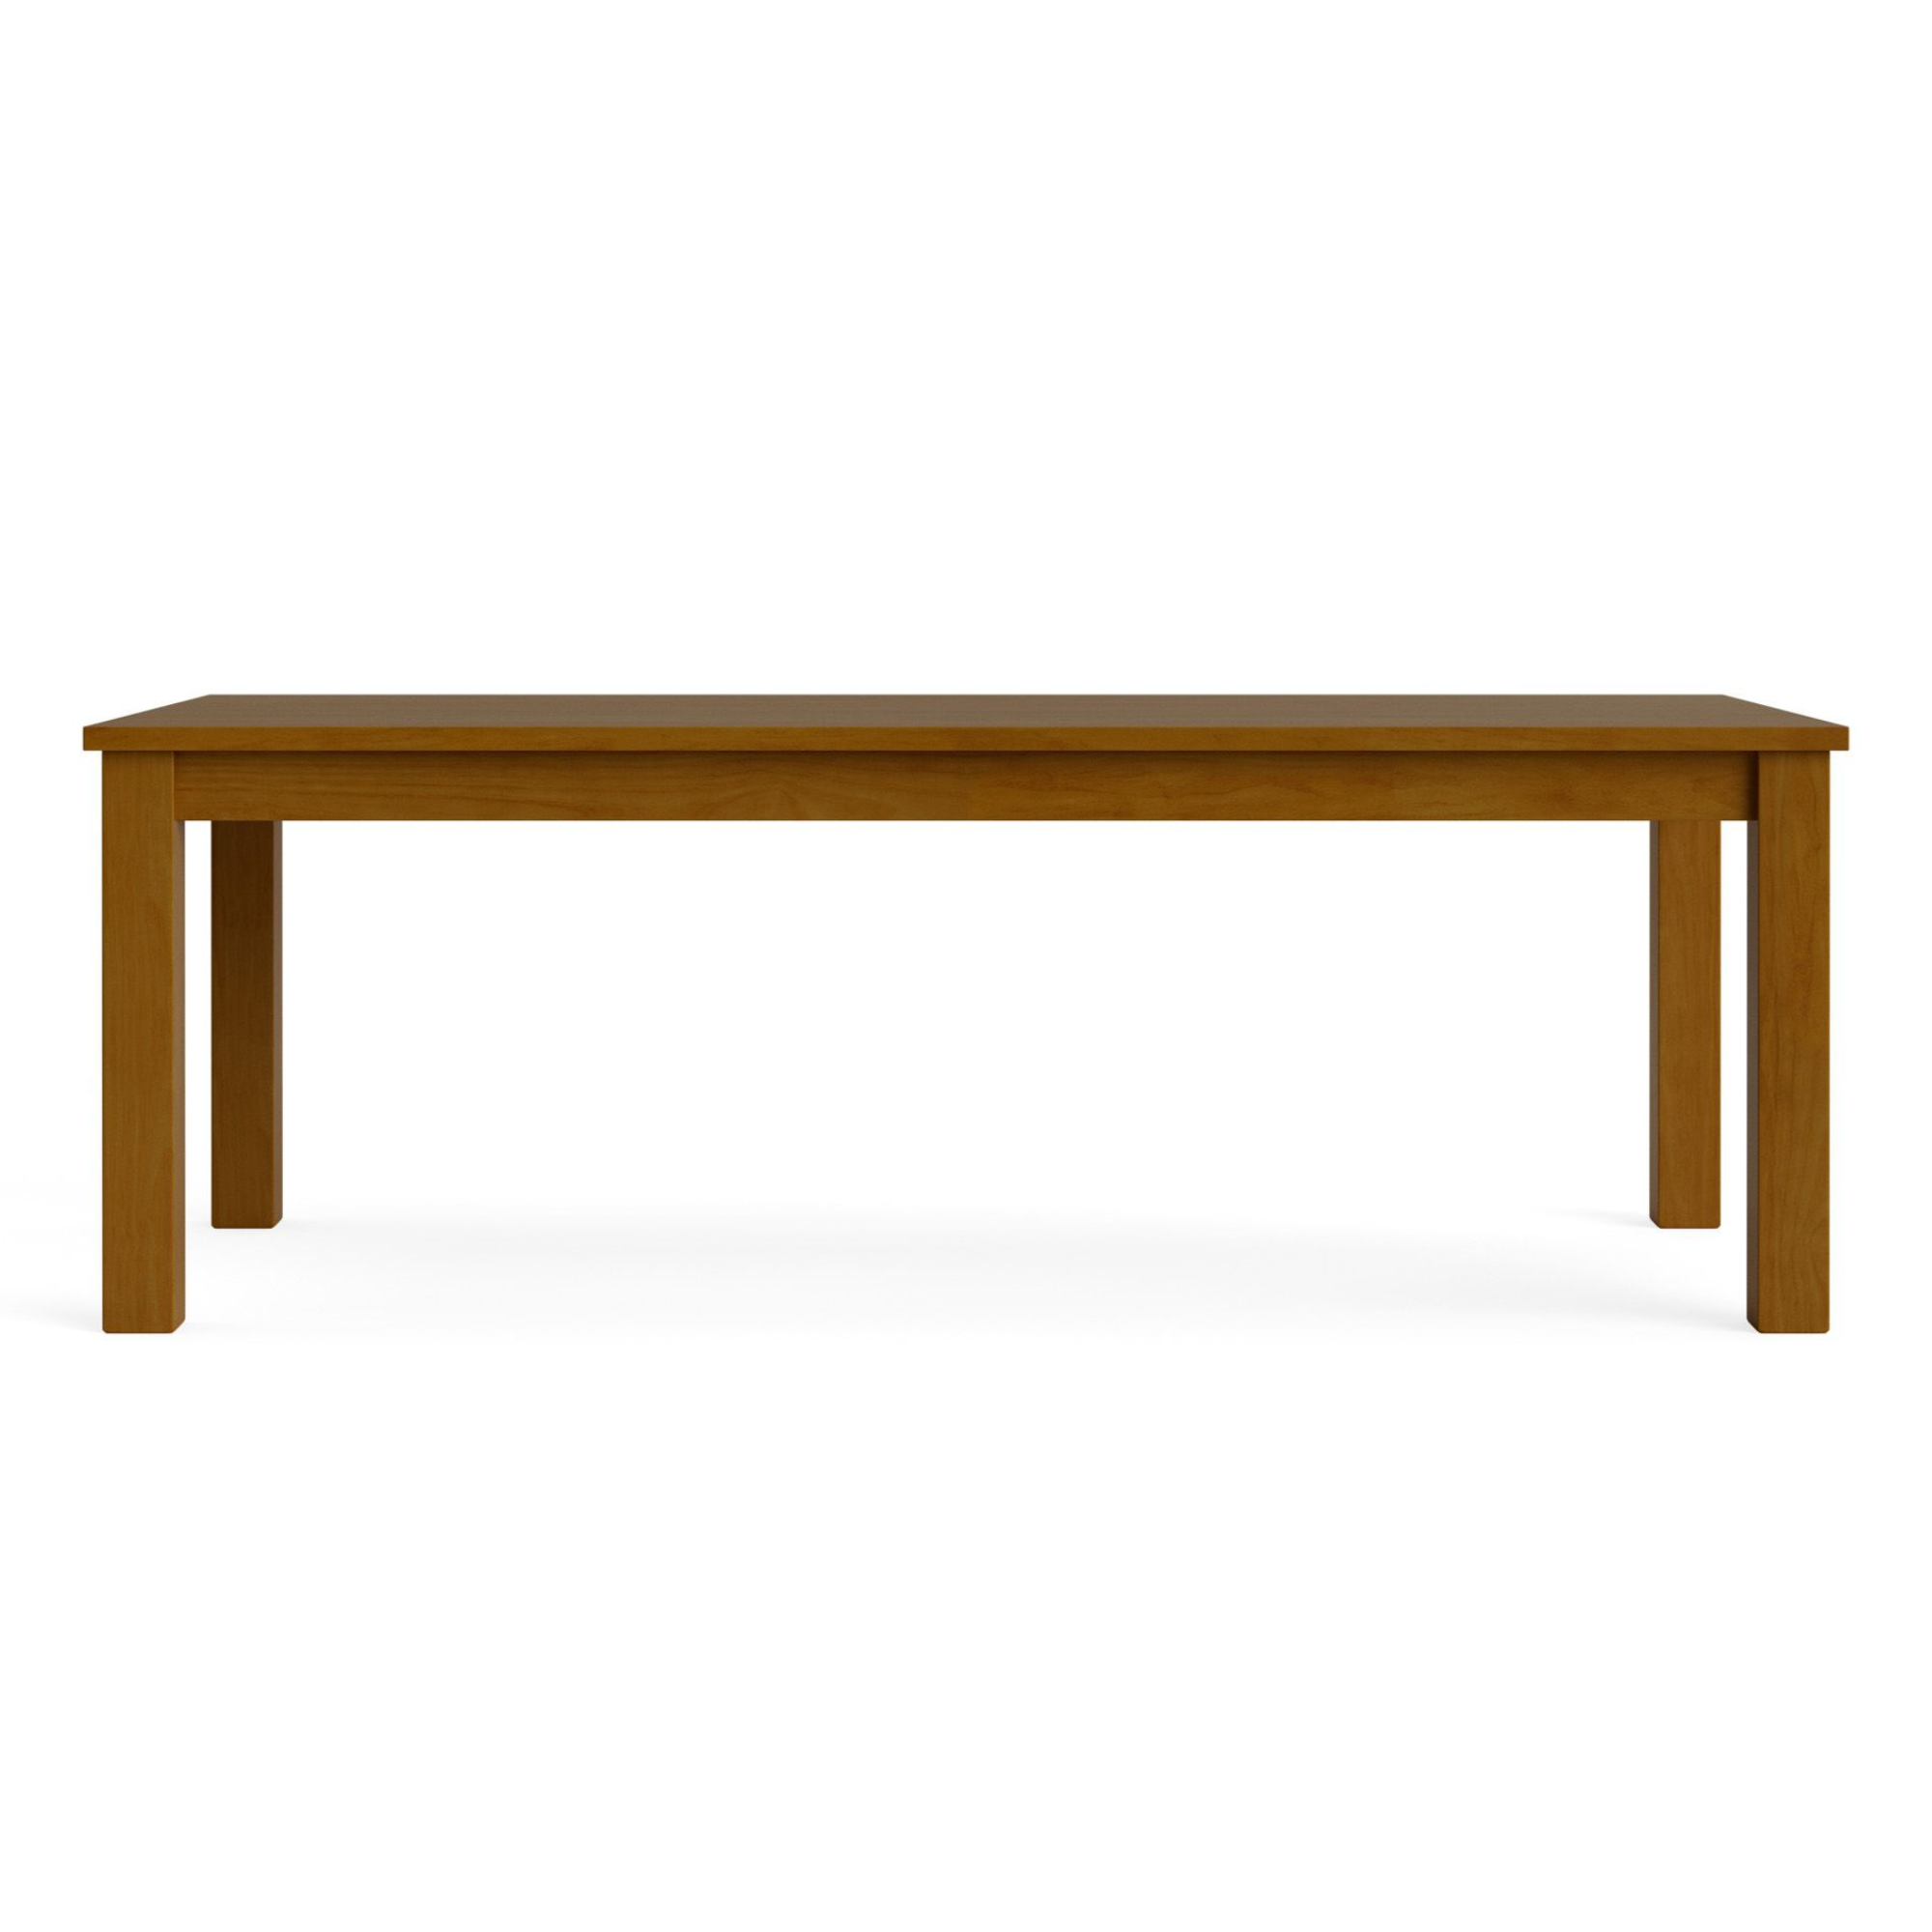 CHARLTON 2200 DINING TABLE | NZ MADE